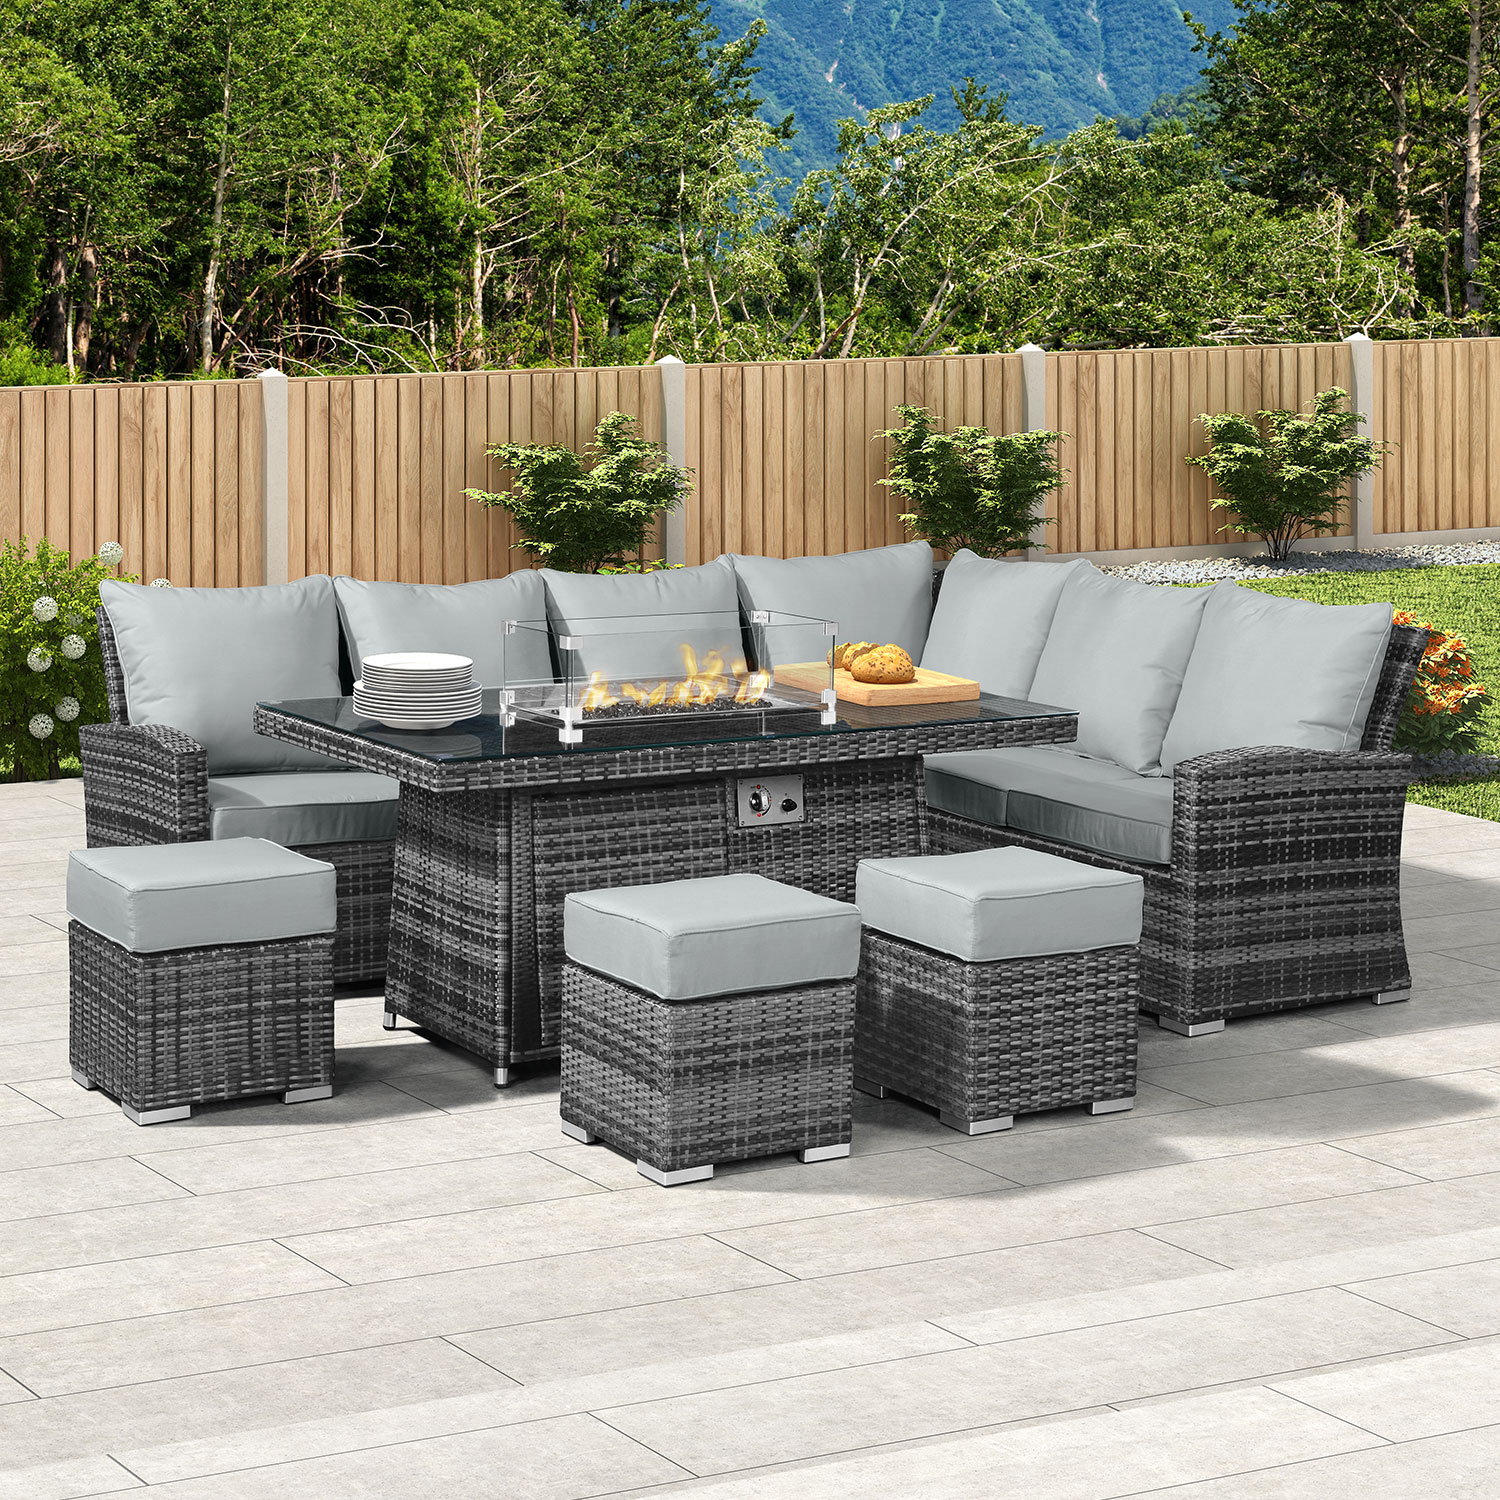 Hand Rattan Corner Sofa Dining Set, Outdoor Garden Furniture With Gas Fire Pit